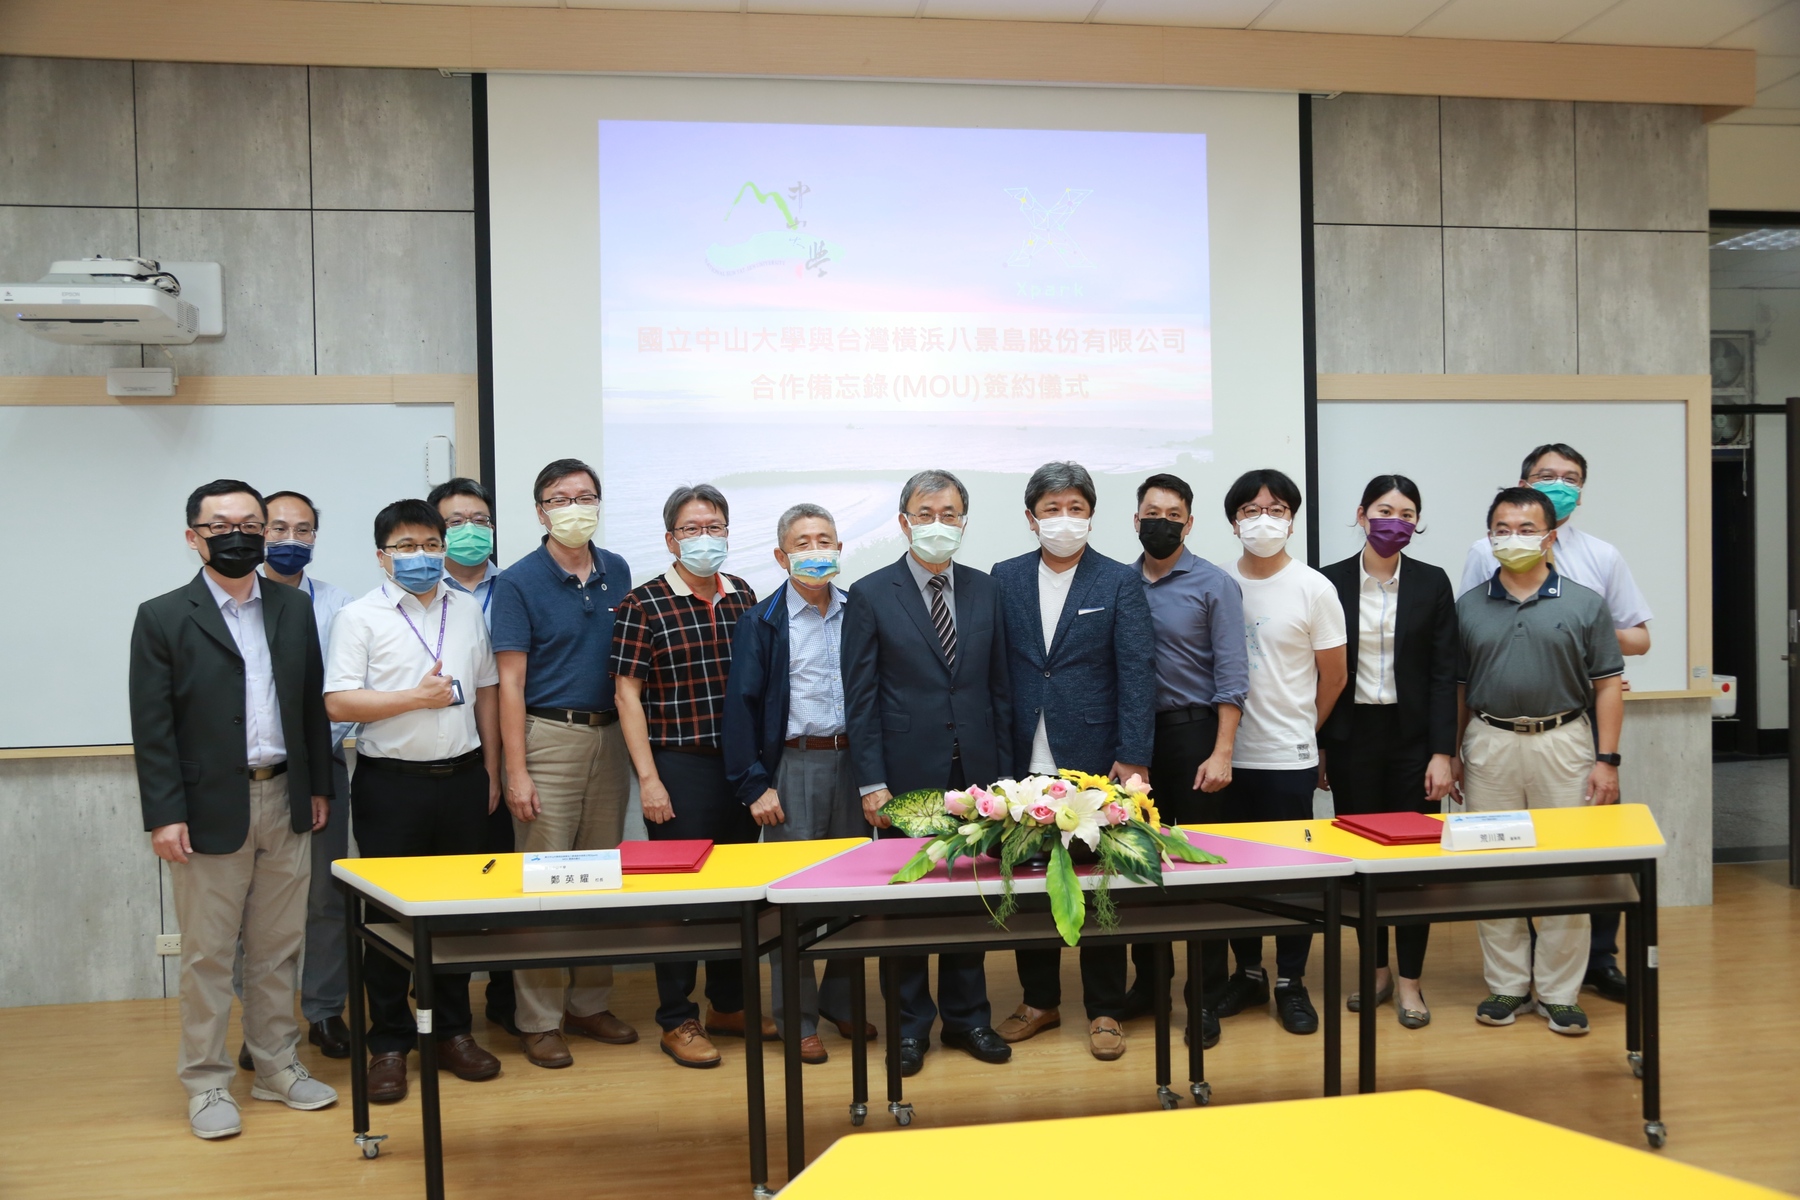 National Sun Yat-sen University announces collaboration with Xpark to accelerate immersive marine research